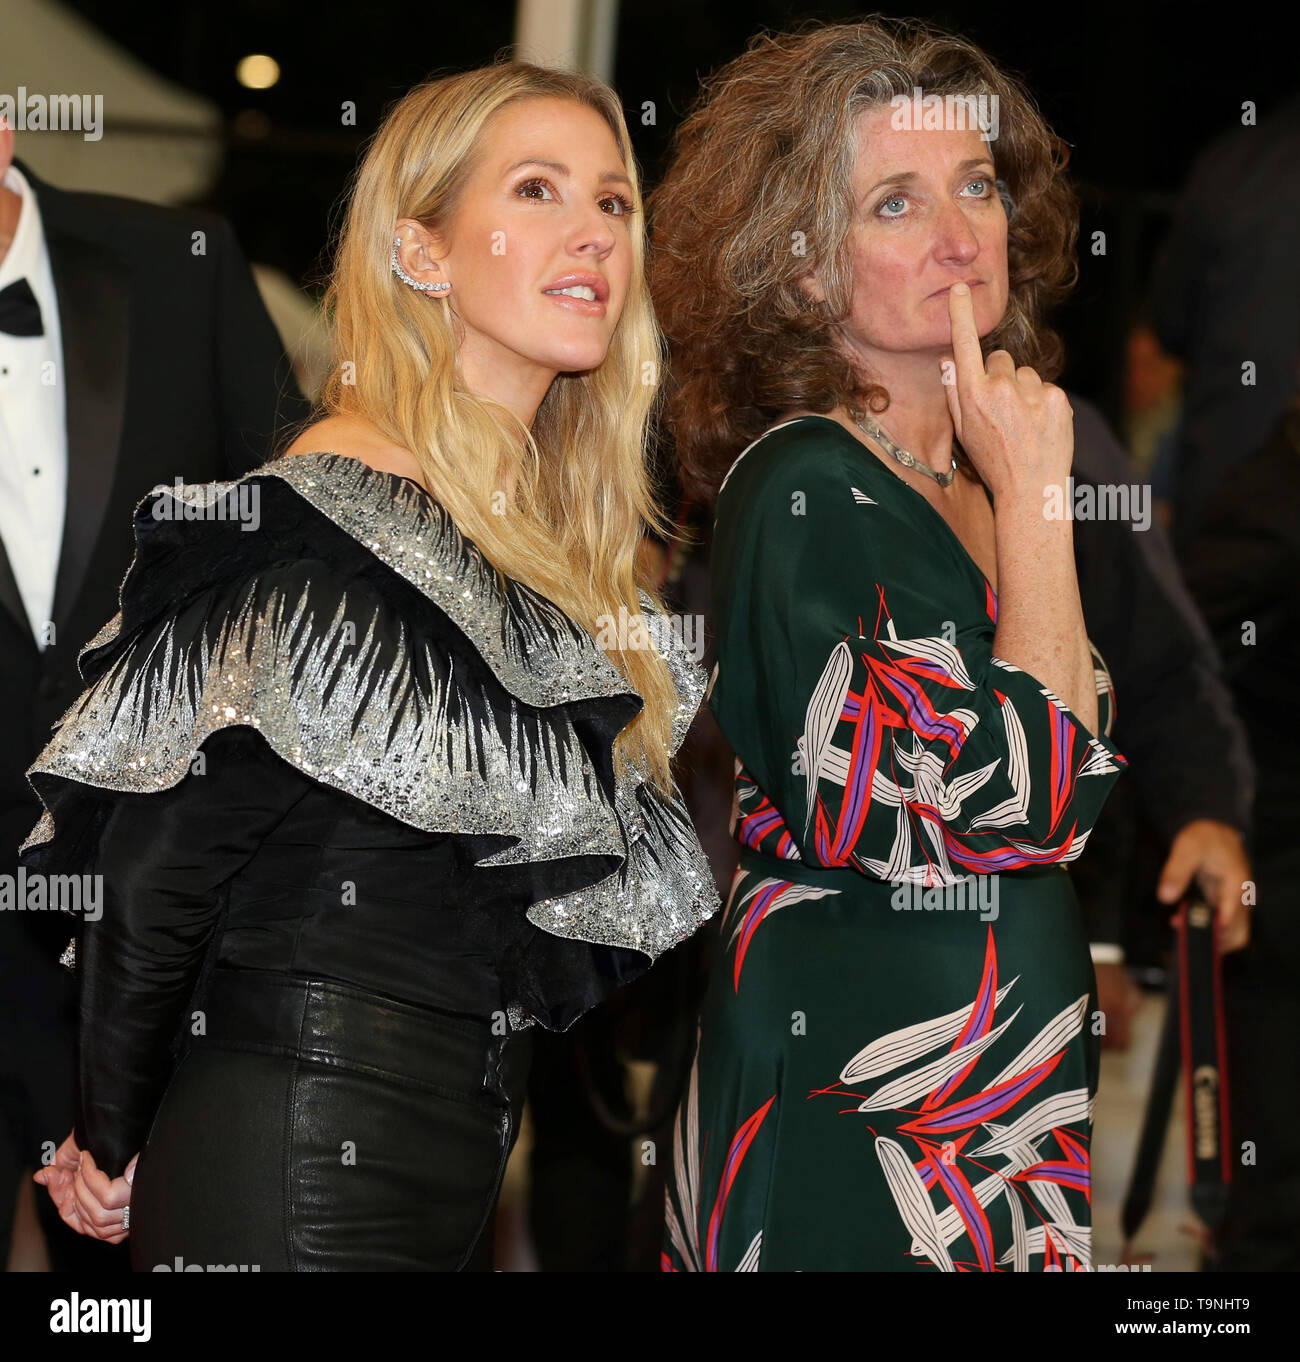 CANNES, FRANCE - MAY 19: Ellie Goulding attends the screening of 'Maradona' during the 72nd Cannes Film Festival (Credit: Mickael Chavet/Project Daybreak/Alamy Live News) Stock Photo